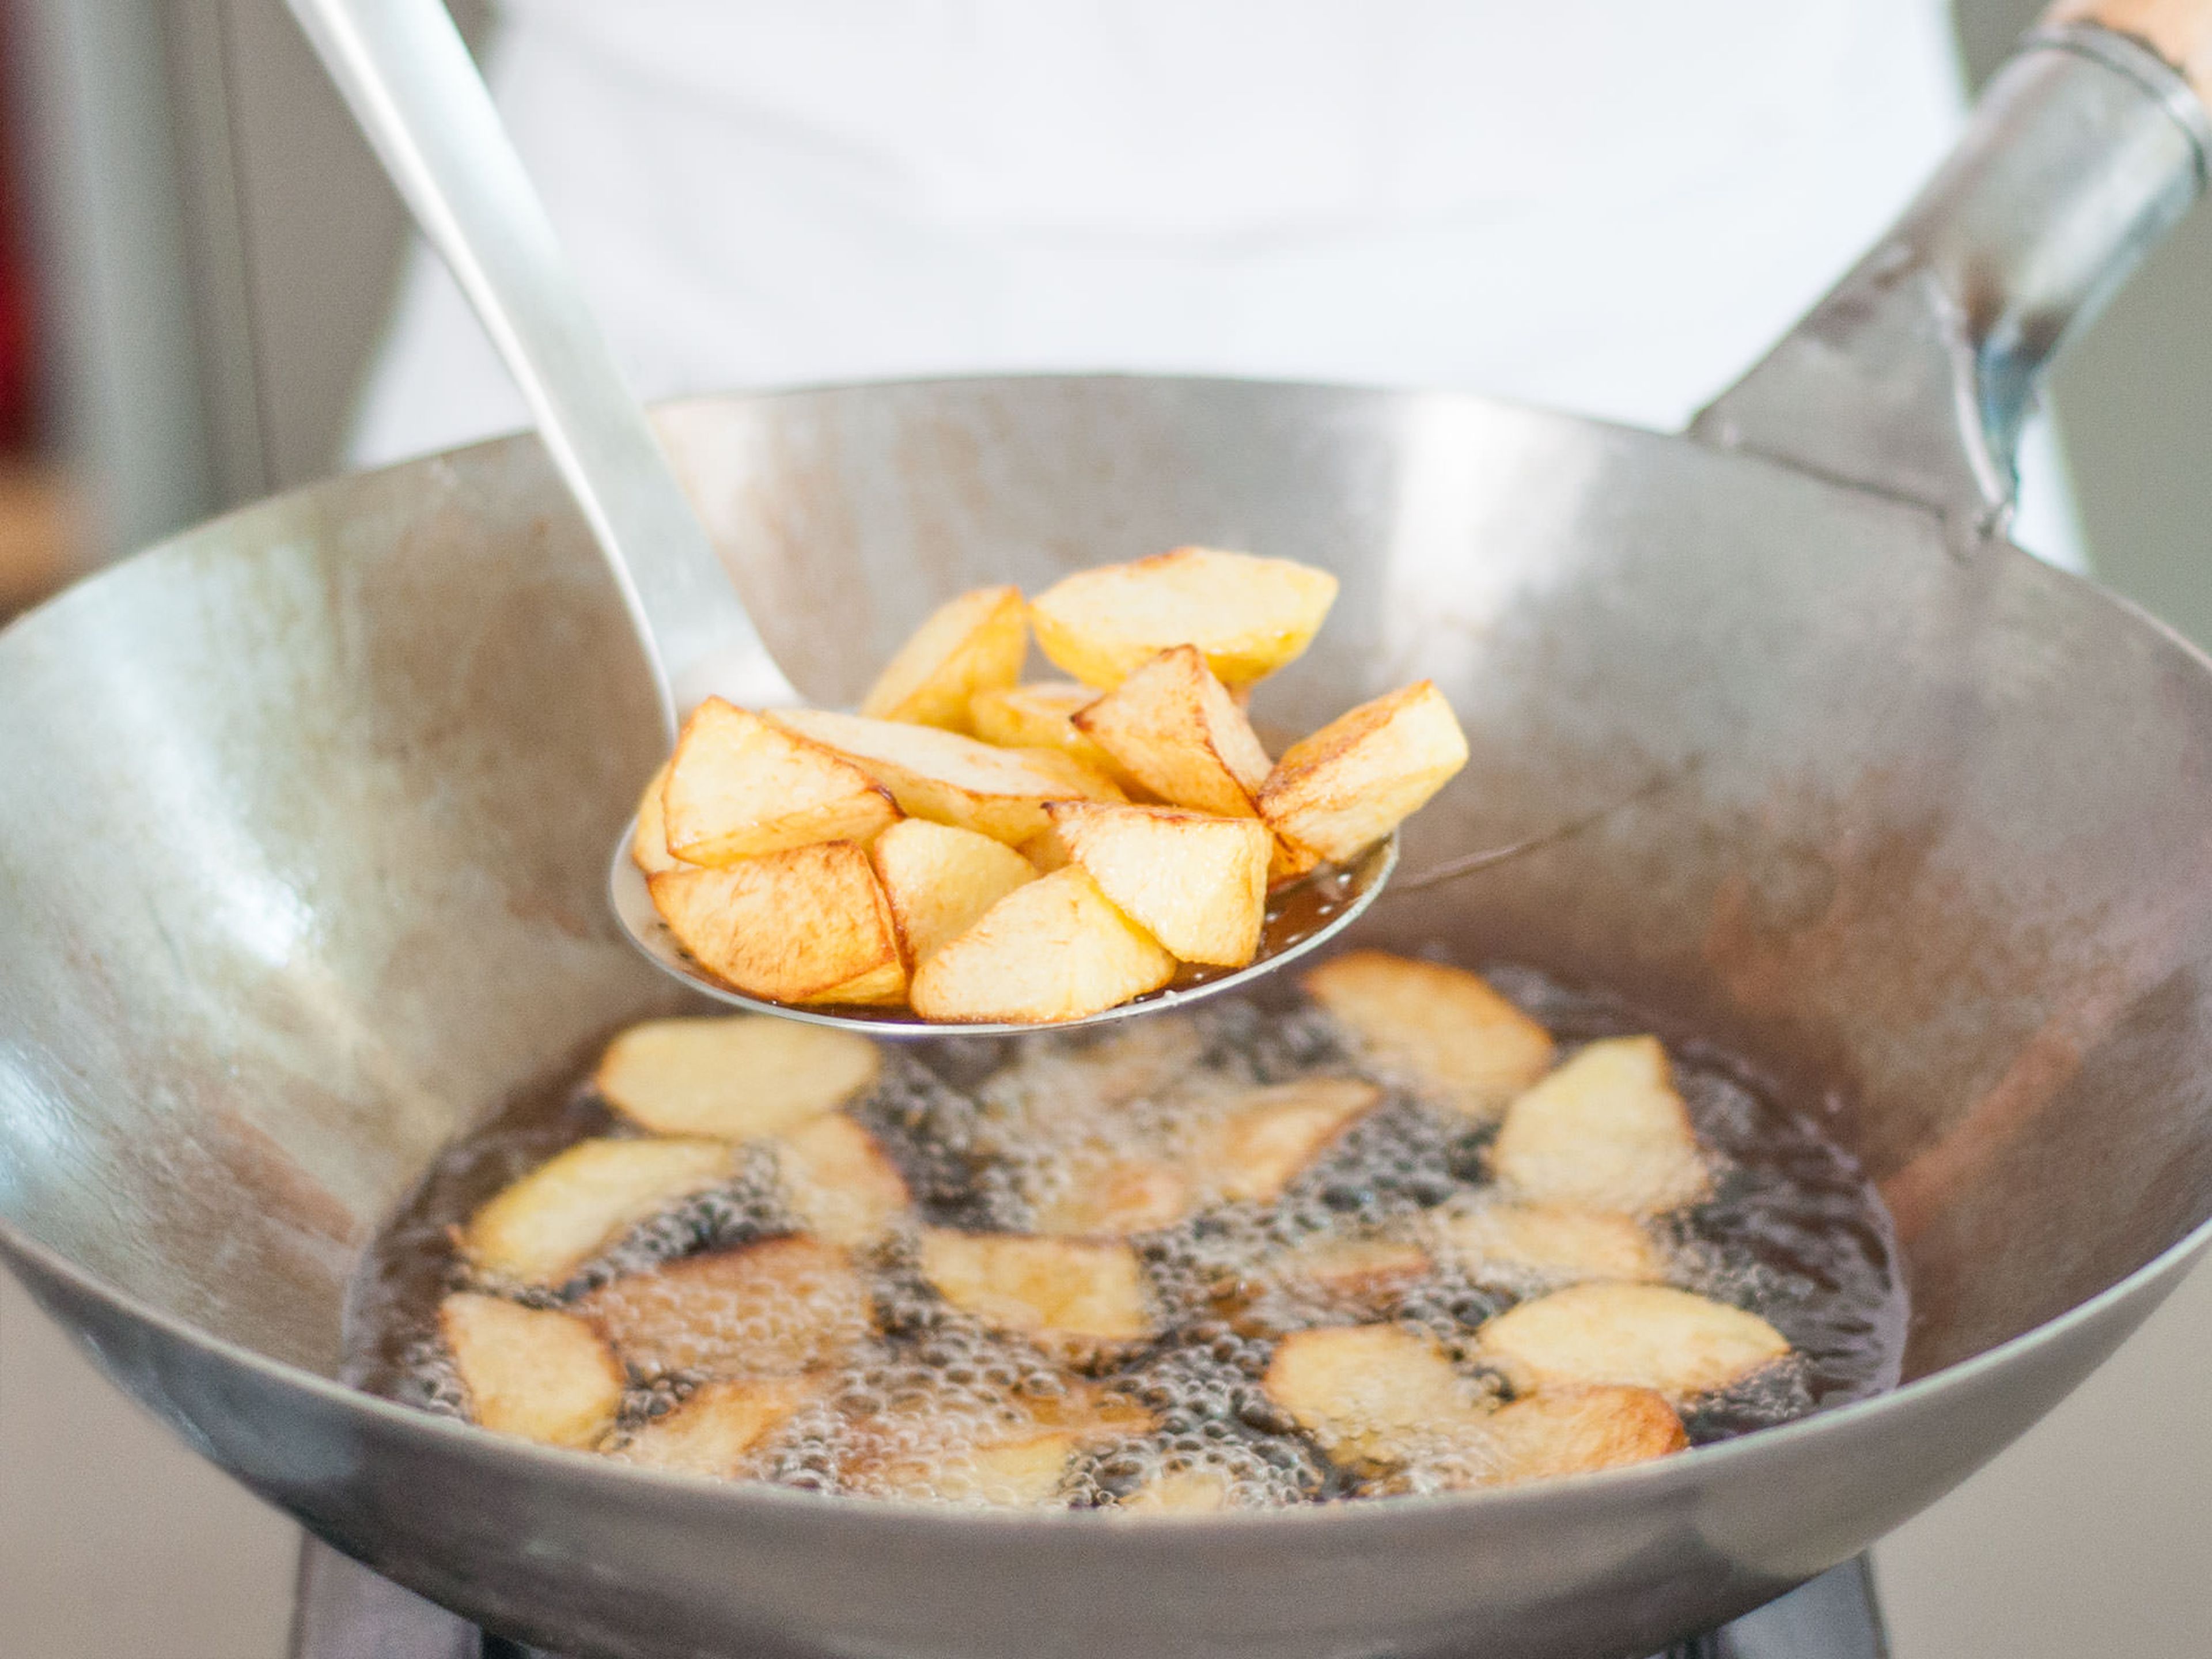 Deep fry potatoes until golden brown, remove with a slotted spoon, and transfer to a paper towel-lined plate to drain.